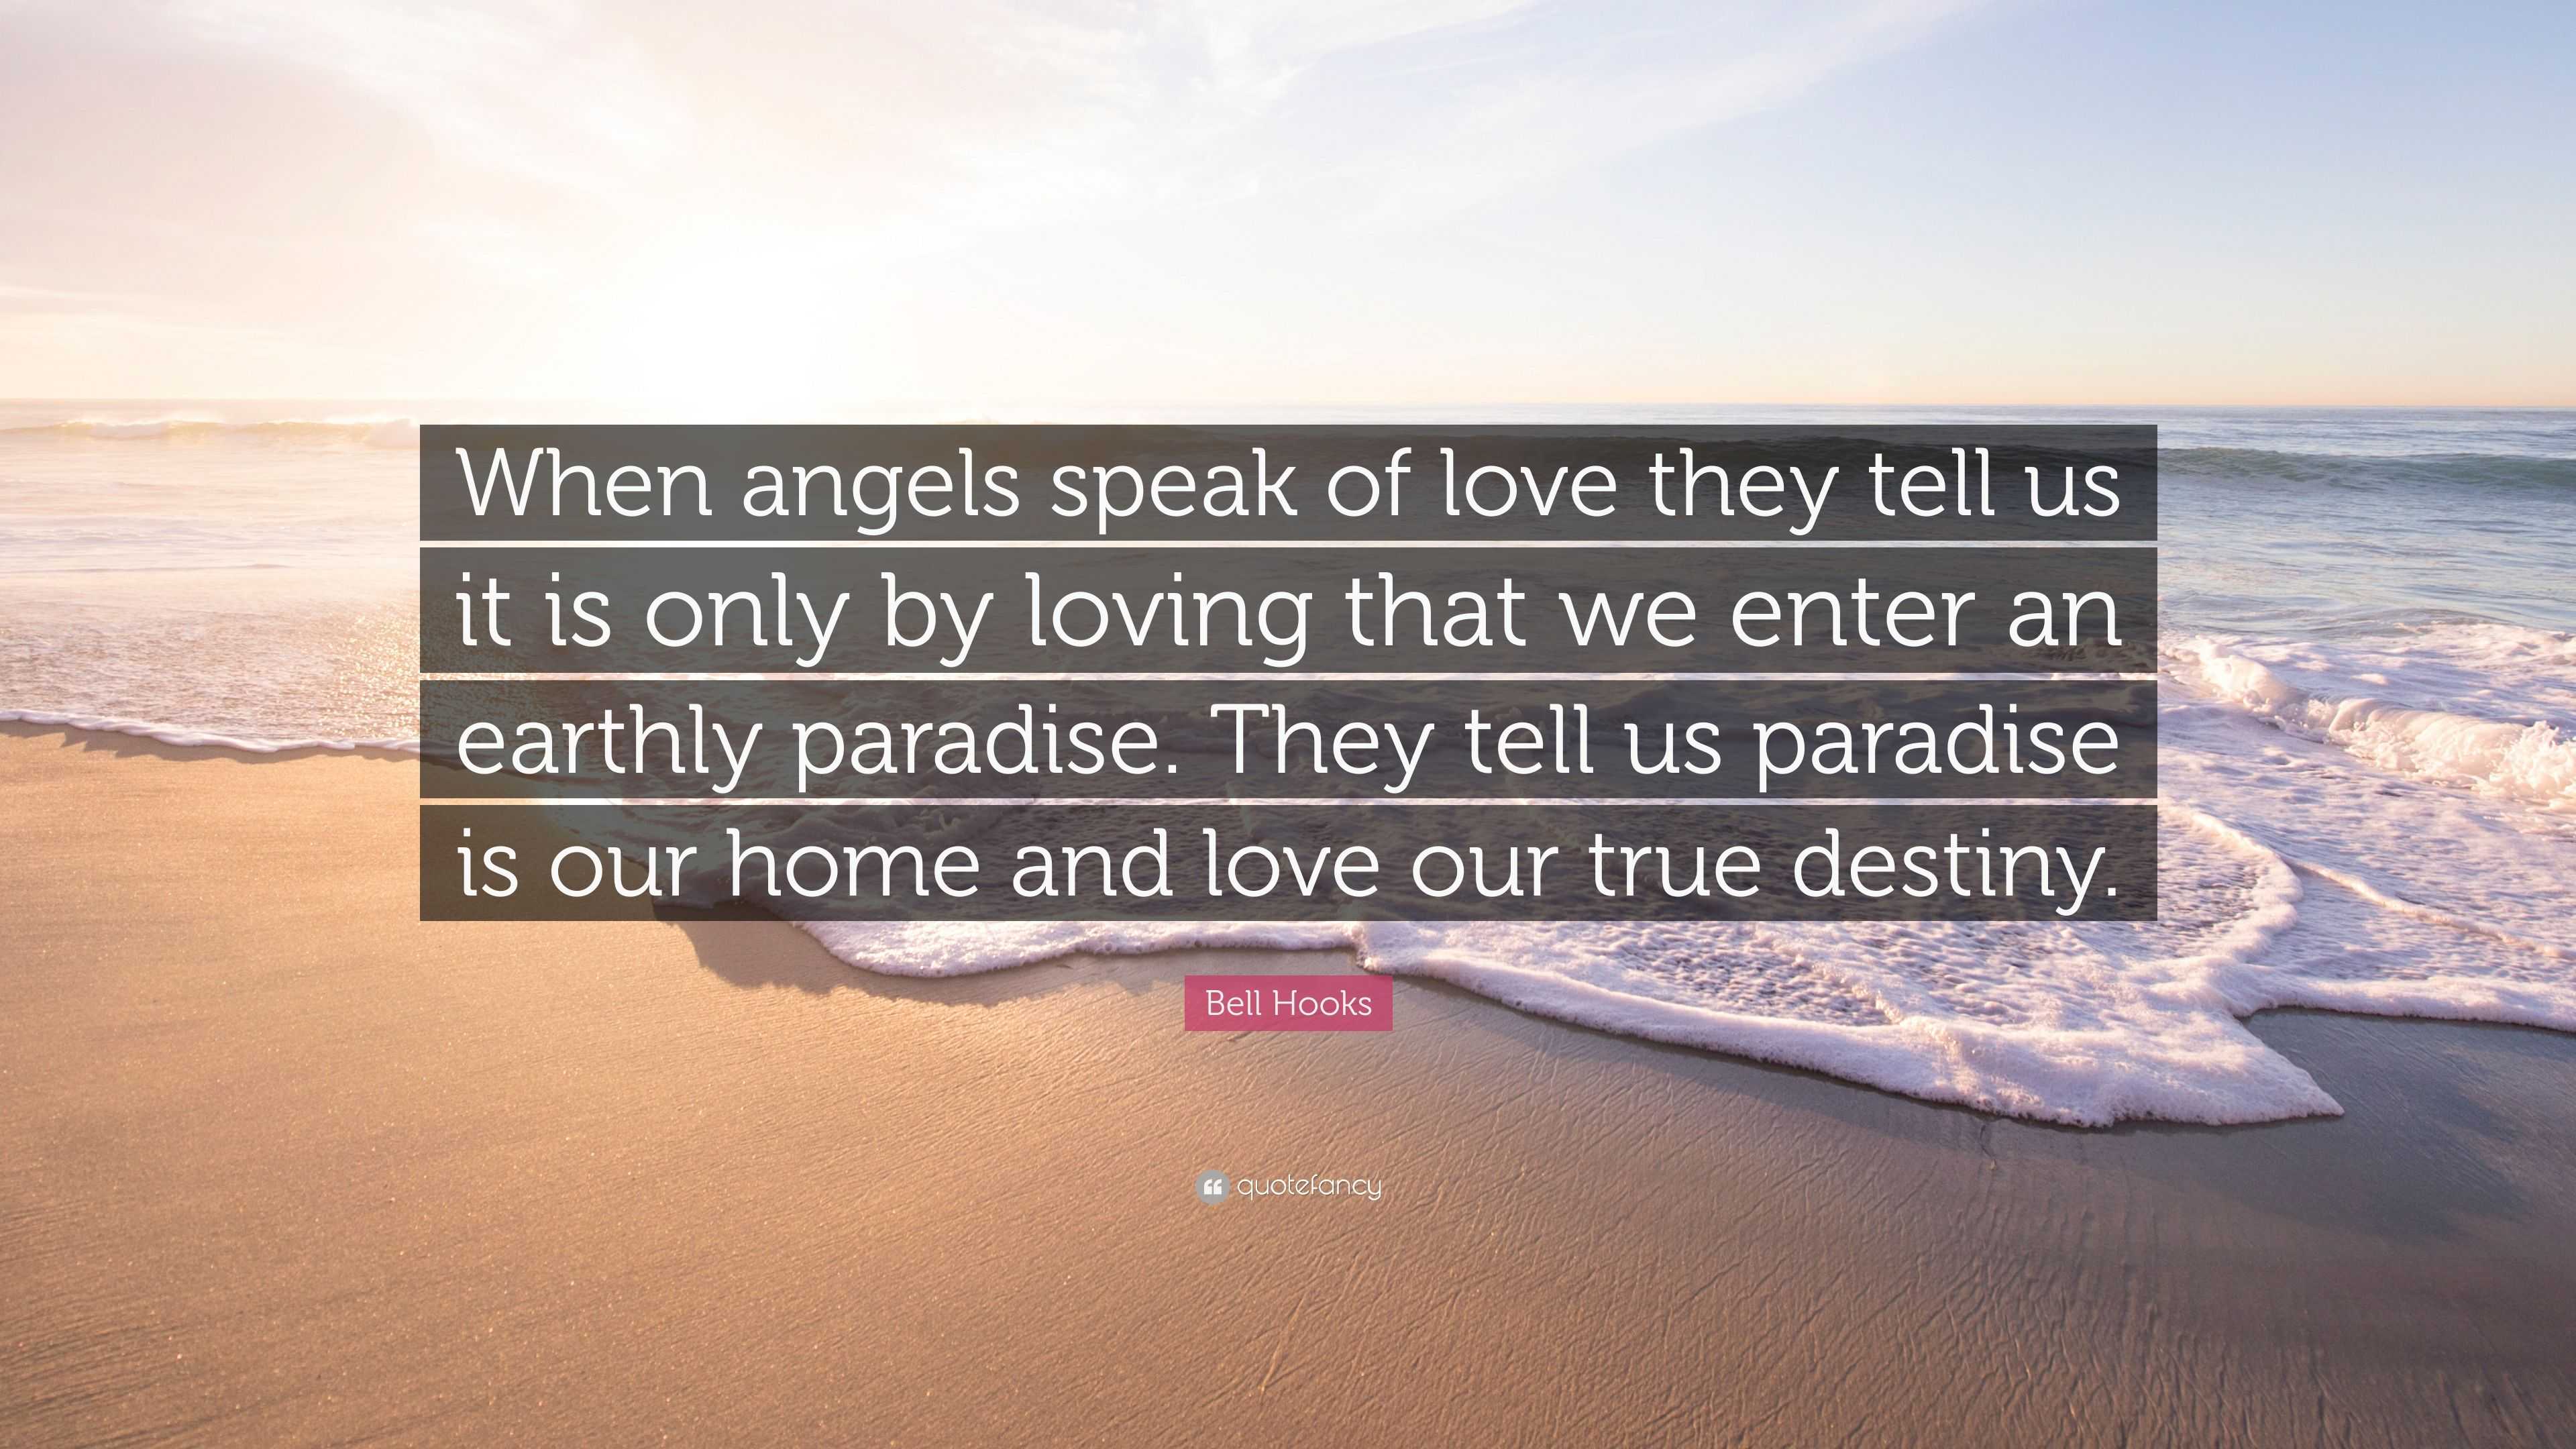 Bell Hooks Quote “When angels speak of love they tell us it is only